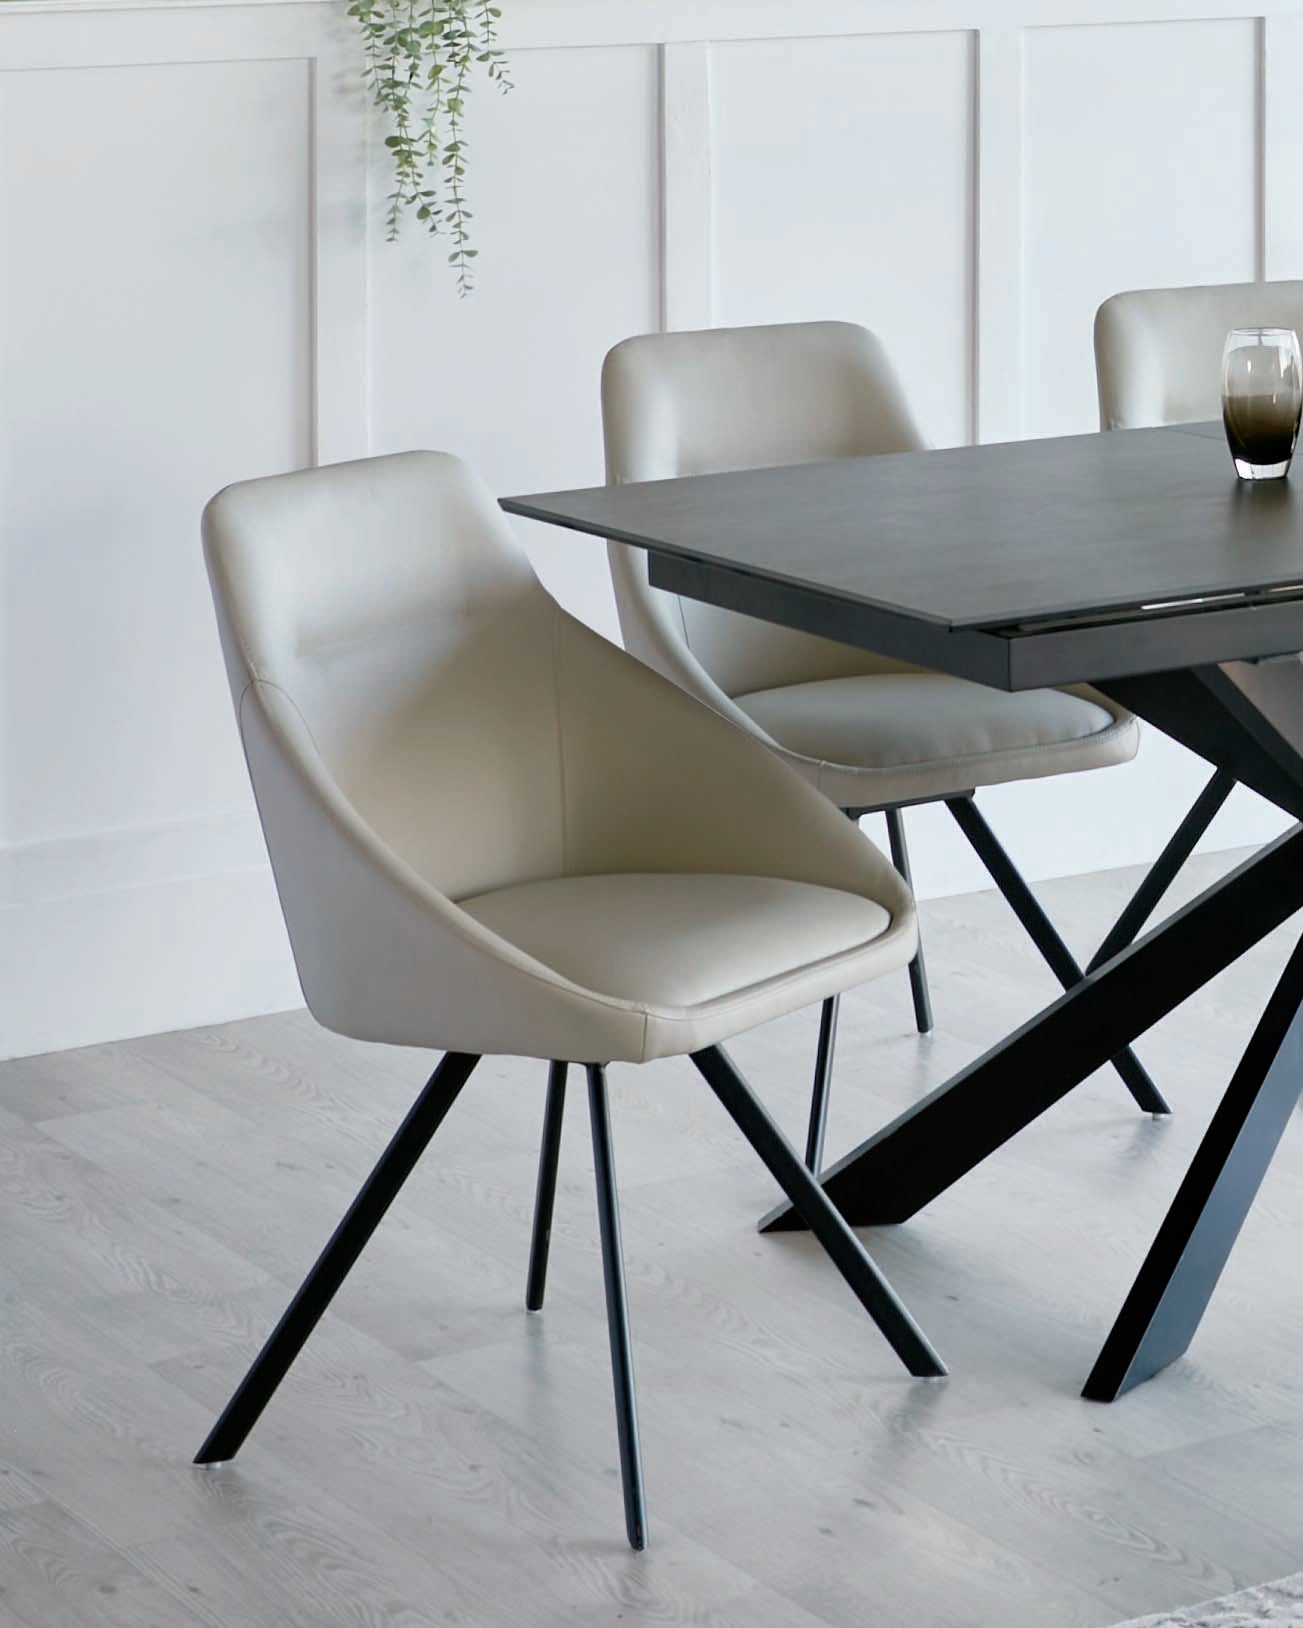 Modern minimalist dining room furniture featuring a dark wood table with a sleek, black frame and angular legs, accompanied by light grey upholstered chairs with comfortable curved backs and slender, tapered black metal legs.